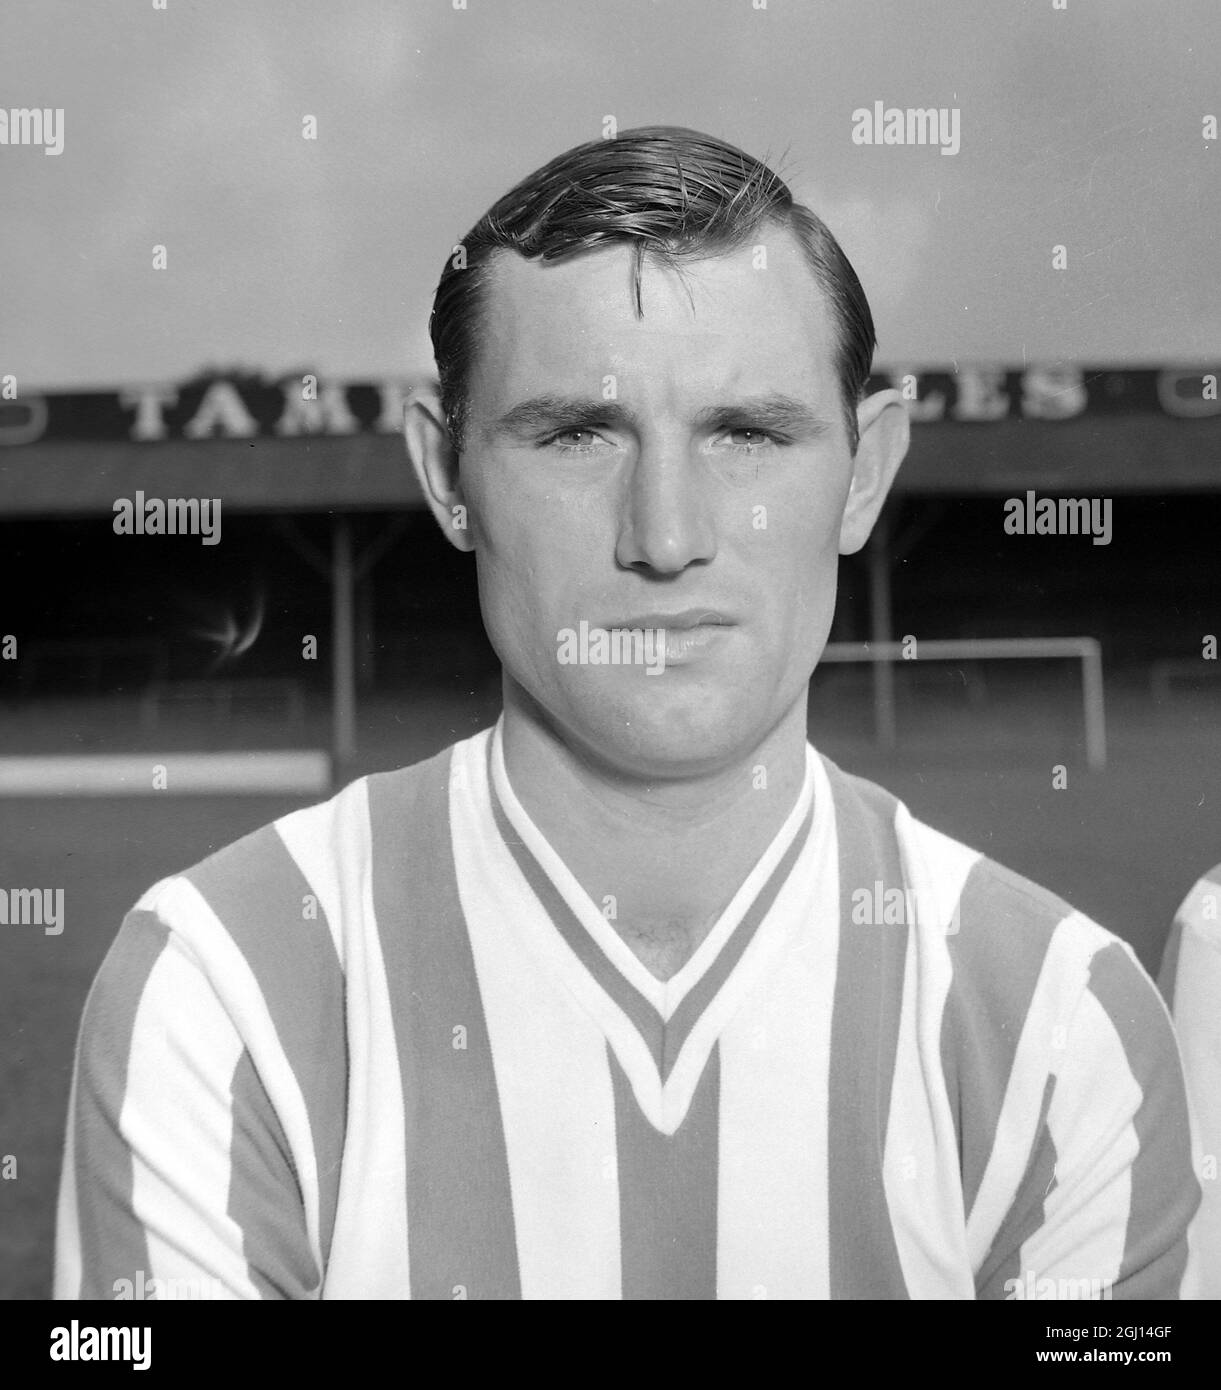 PETER DONNOLLY - PORTRAIT OF FOOTBALLER, PLAYER OF BRIGHTON & HOVE FC FOOTBALL CLUB TEAM ; 9 AUGUST 1962 Stock Photo